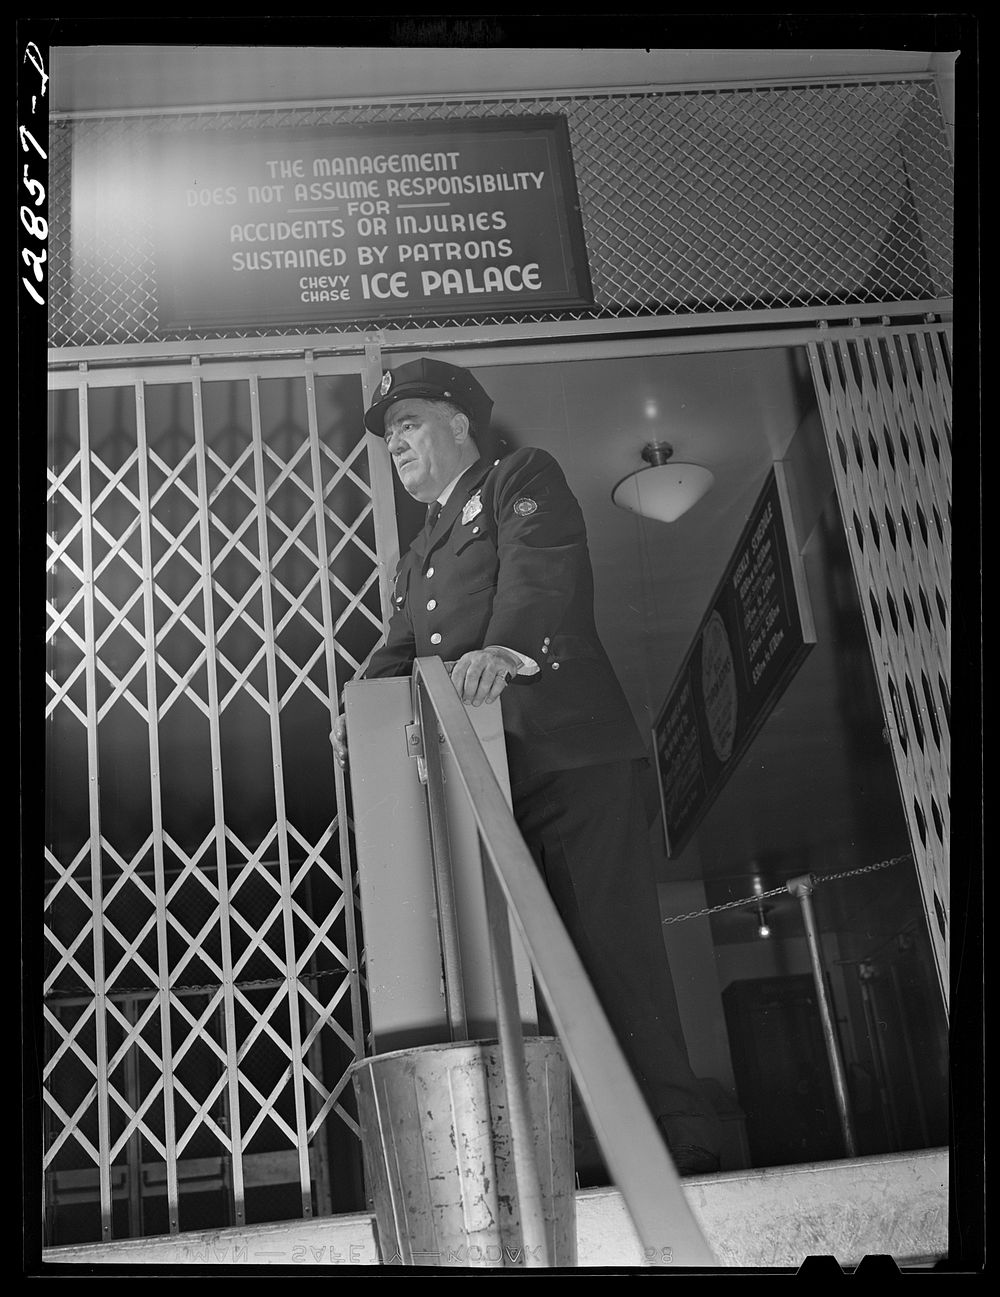 Chevy Chase Ice Palace, Washington. D.C. Security guard. Sourced from the Library of Congress.